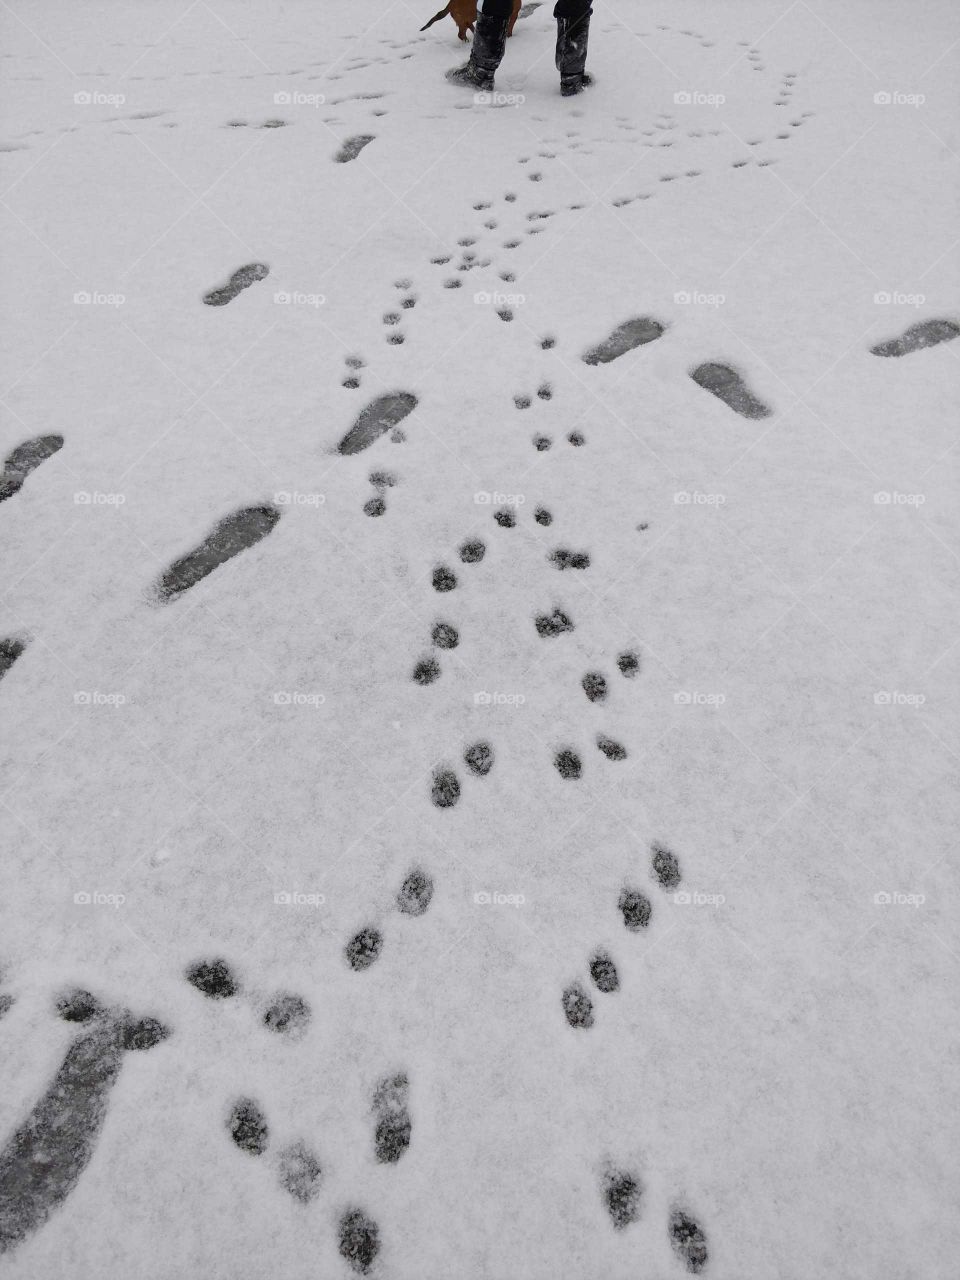 Paw prints in the rare heavy snowfall in southeast Georgia.